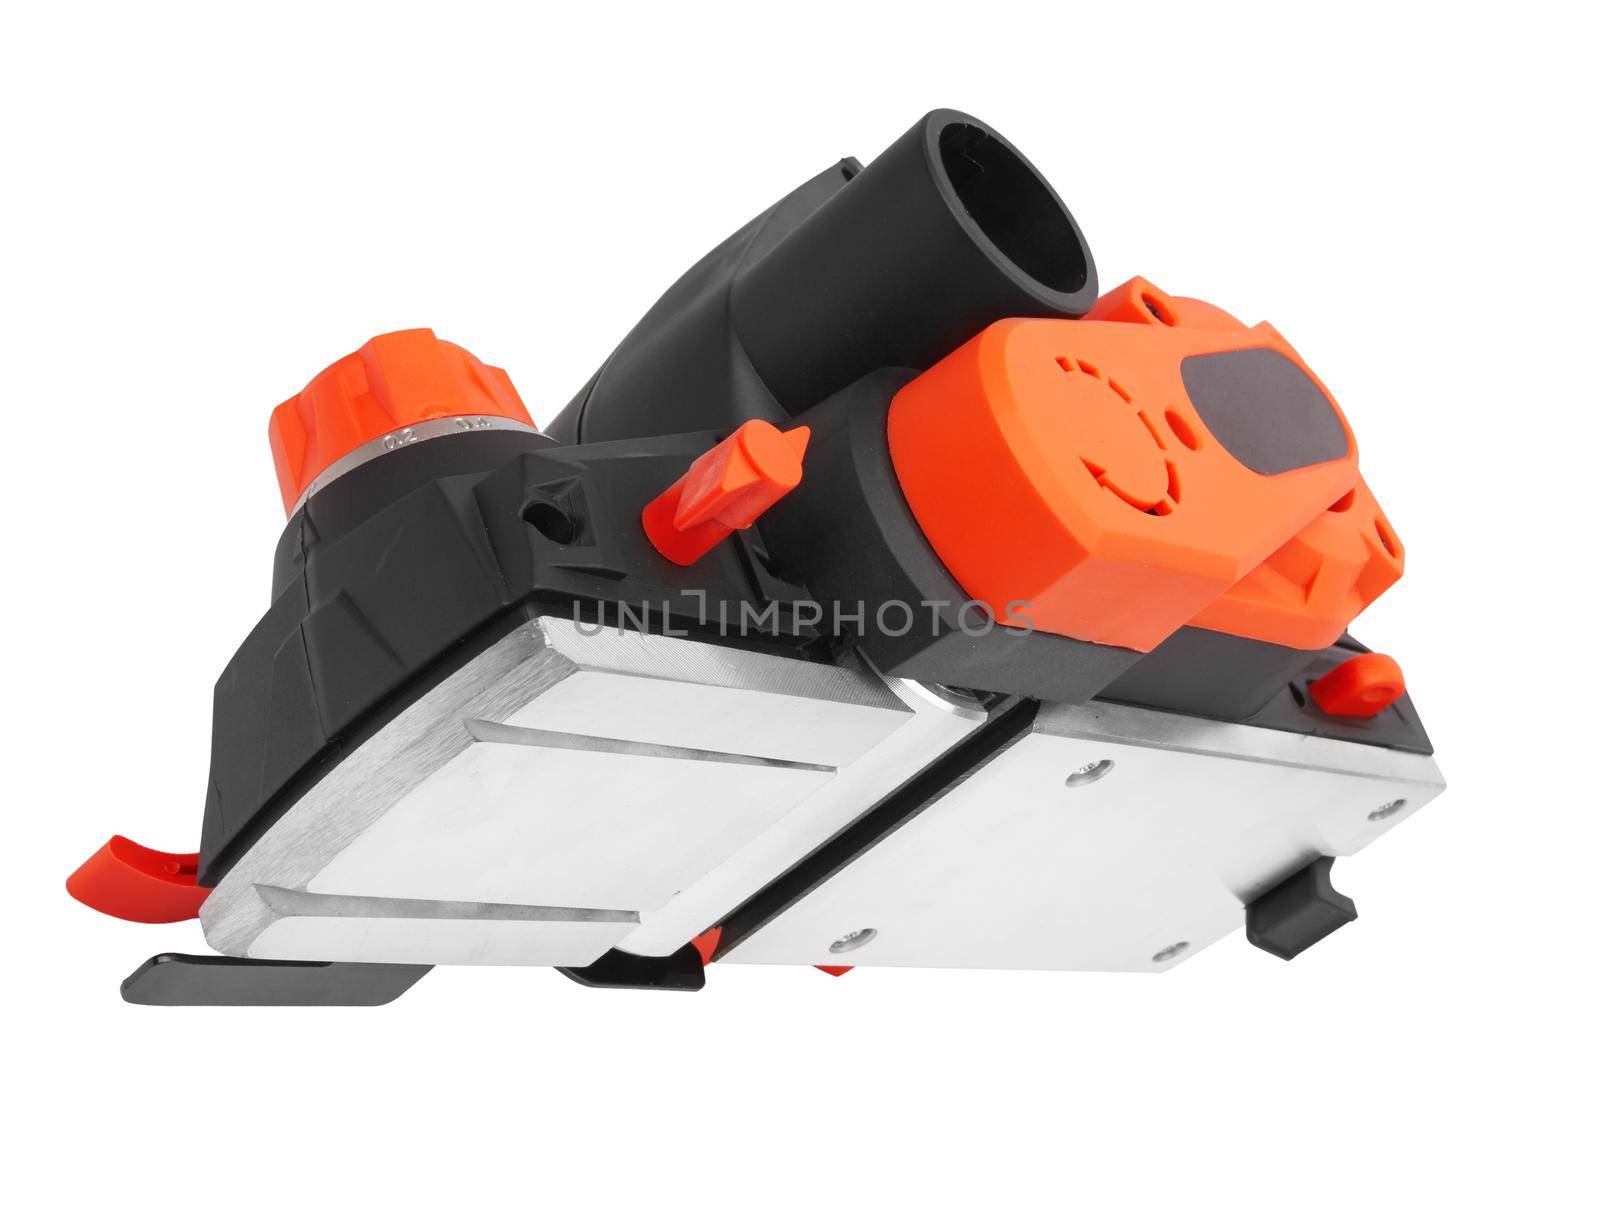 Powerful electric planer by pioneer111